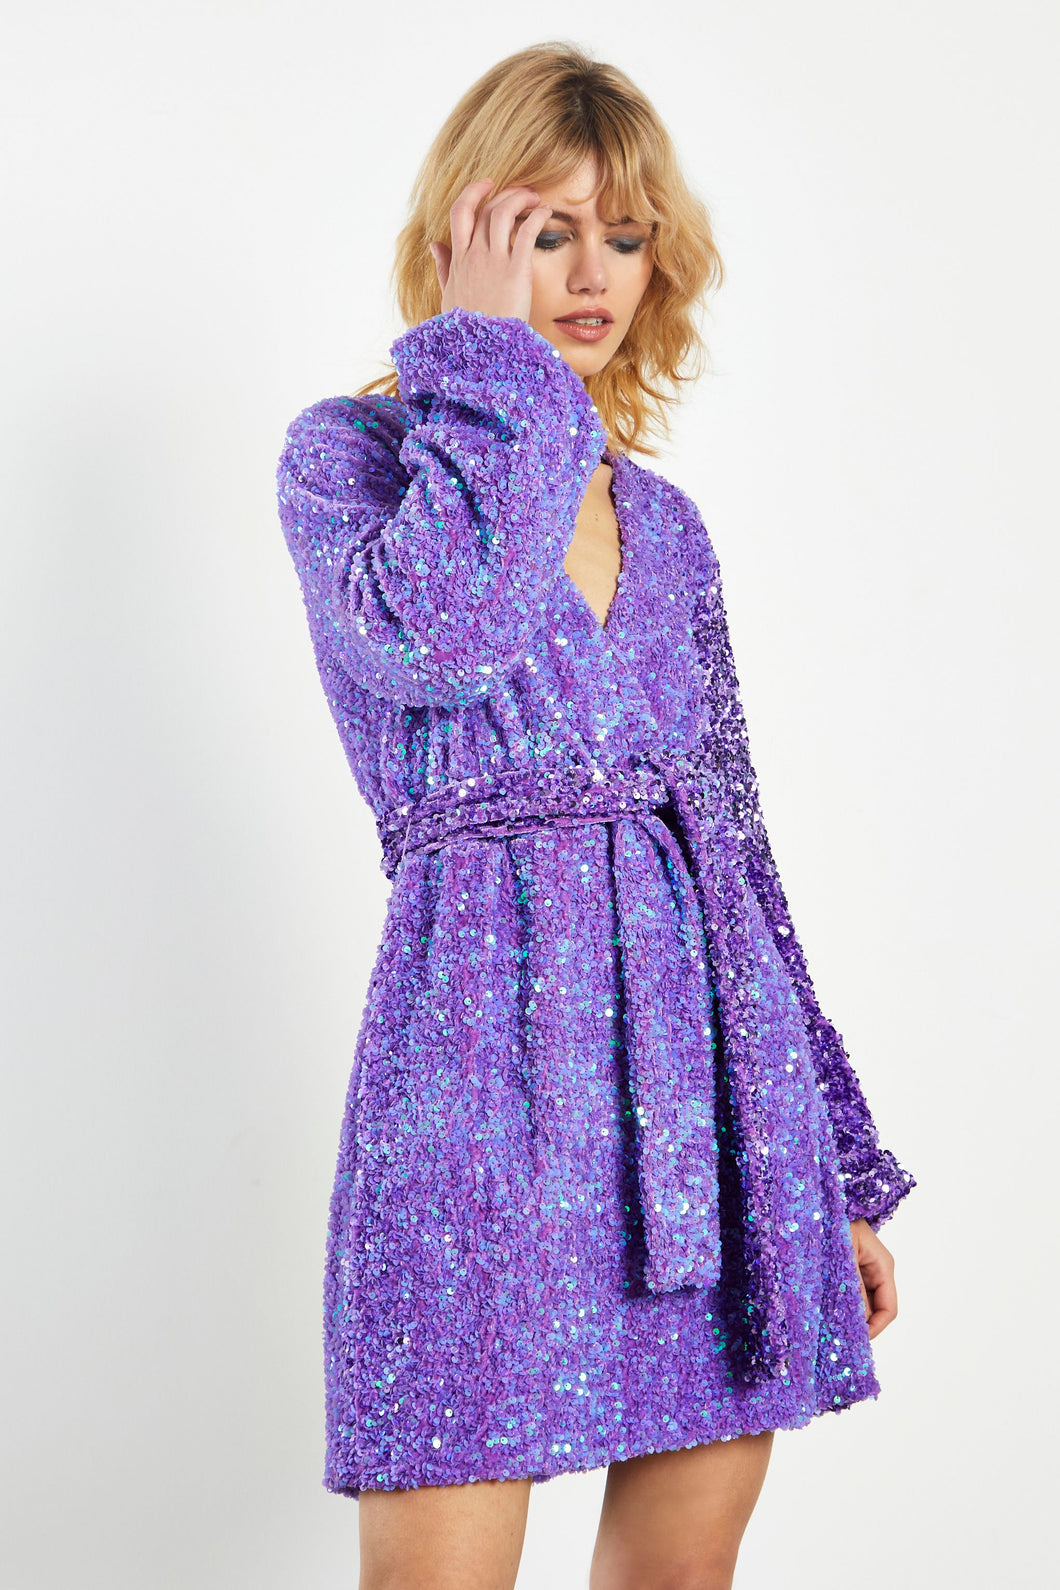 Glam Expressway’s Purple Sequin Dress is chic, feminine and glamorous! This fun sequin dress is fully lined, with a relaxed fit and a self tying belt. This elegant dress has a retro and modern feel at the same time. Wear this glamorous sequin dress when you want to stand out!